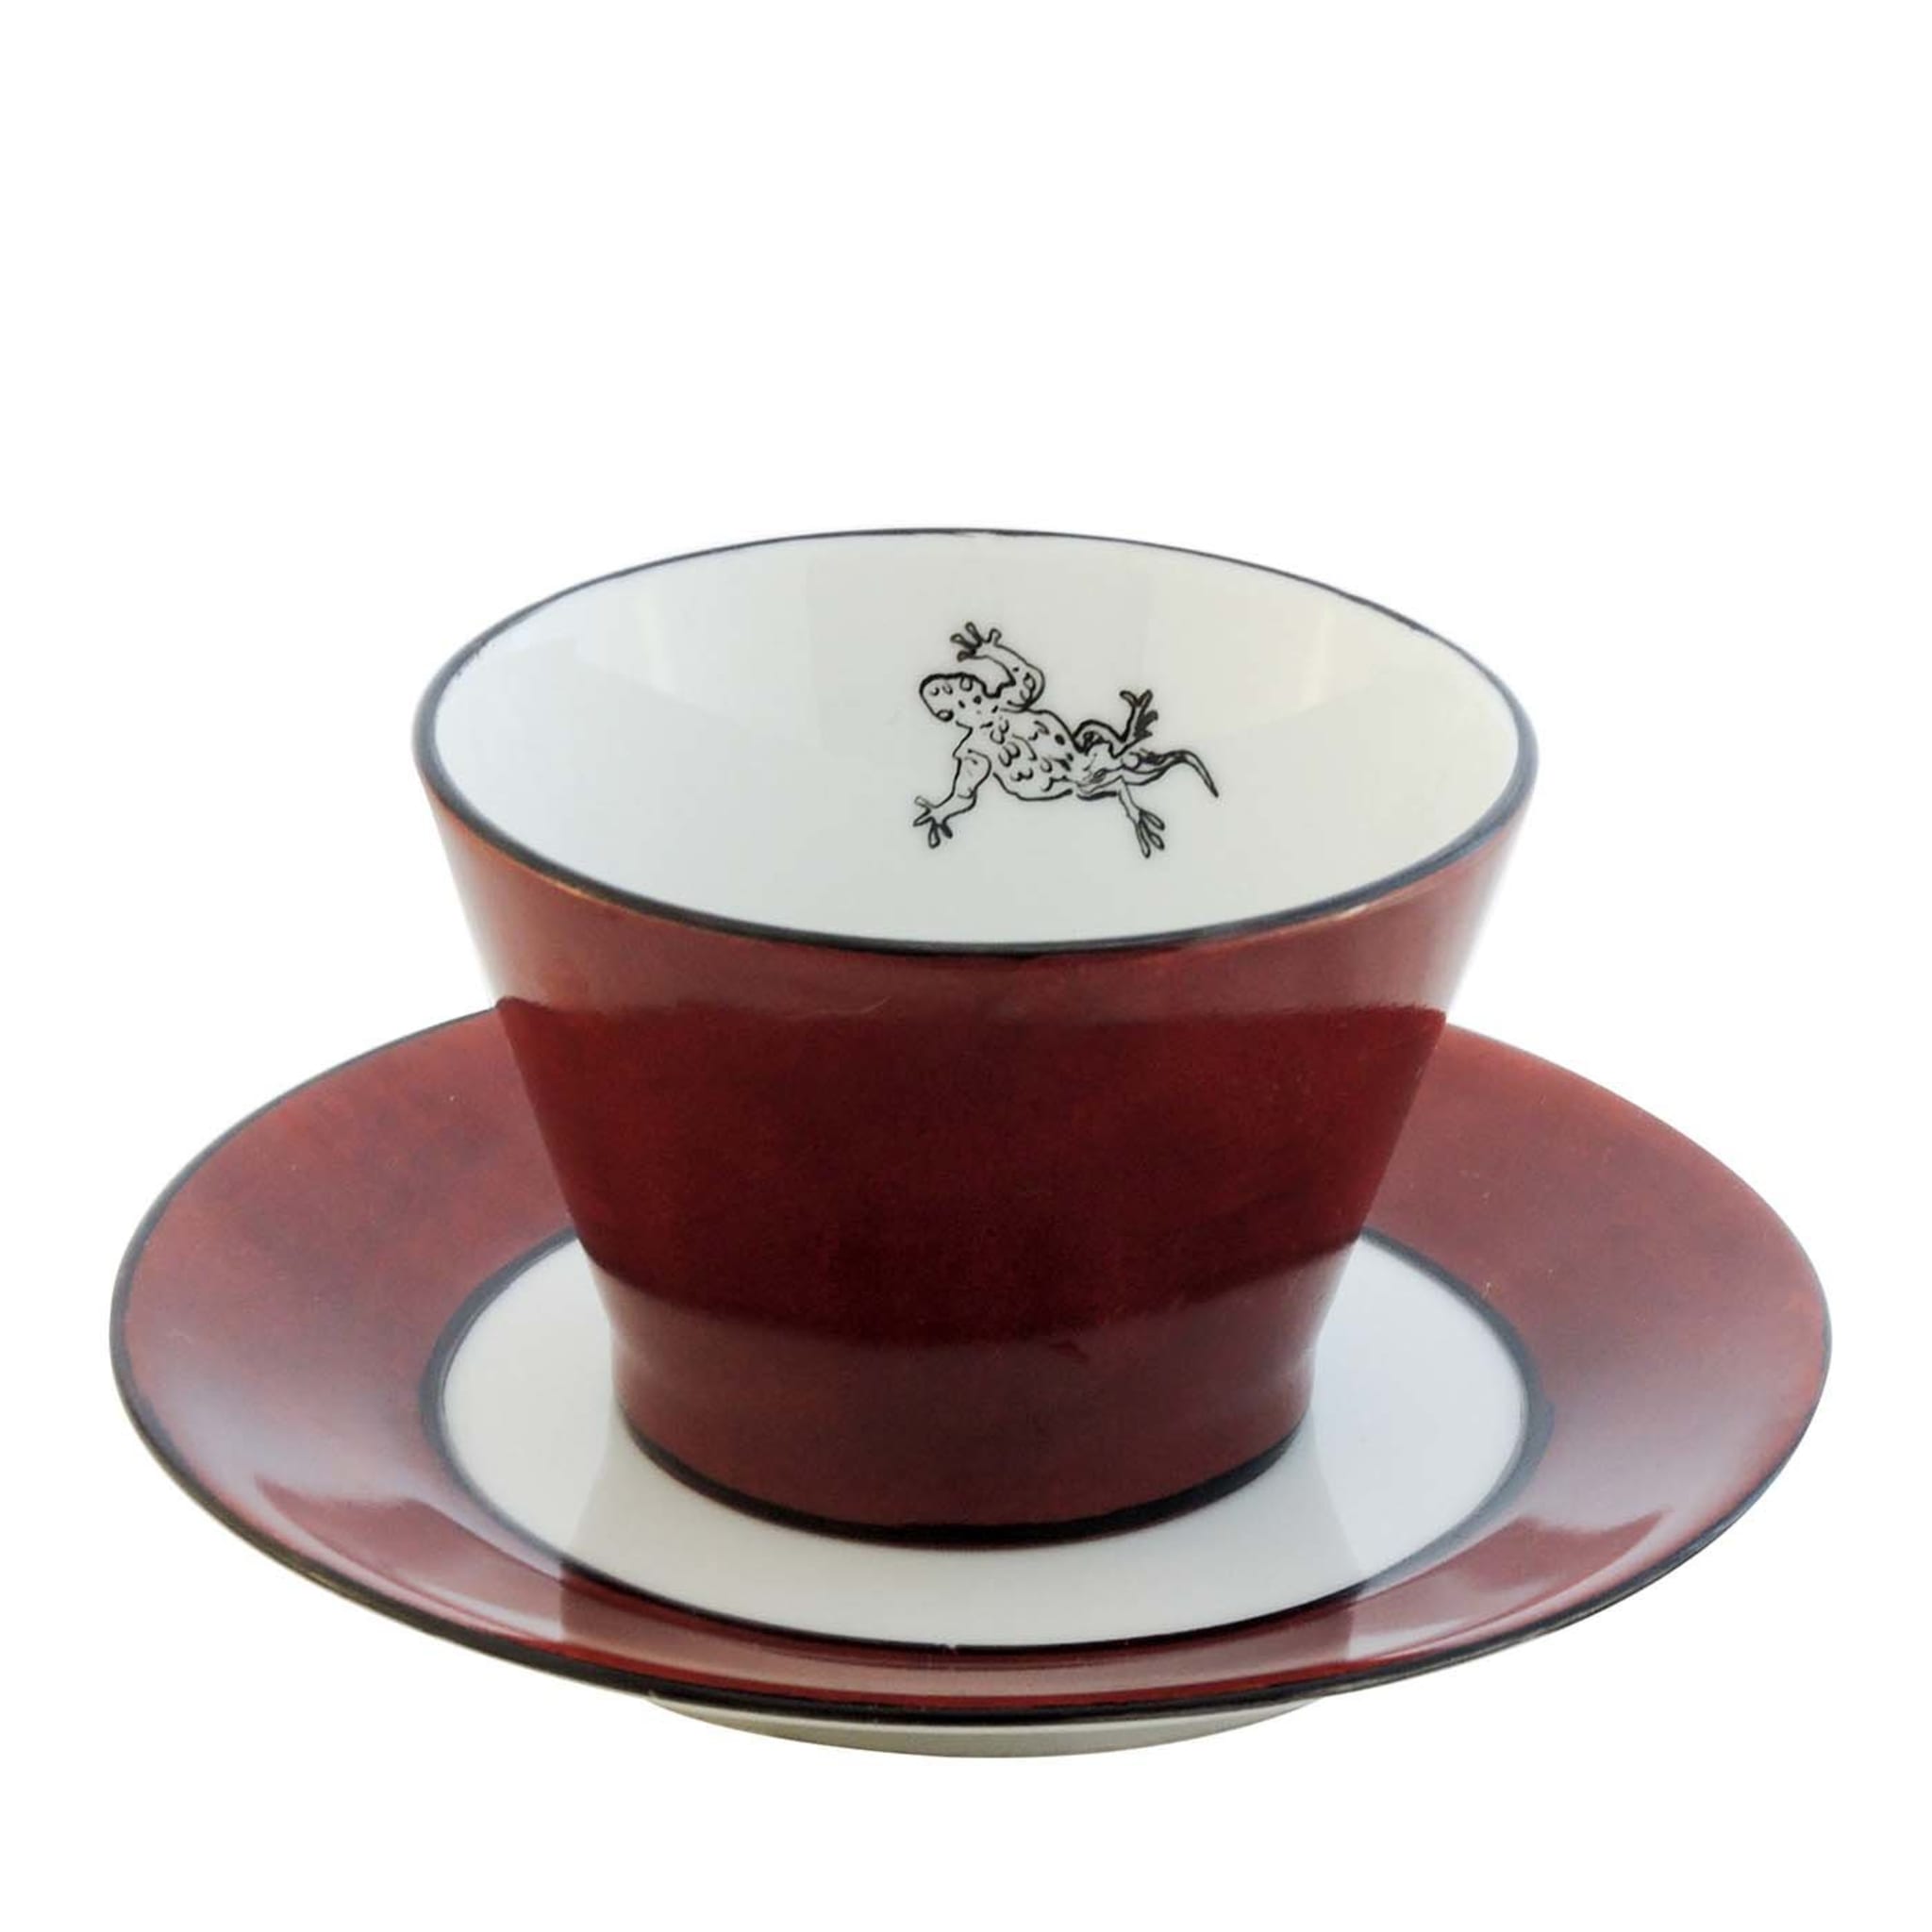 Bestiario Cup and Saucer - Main view